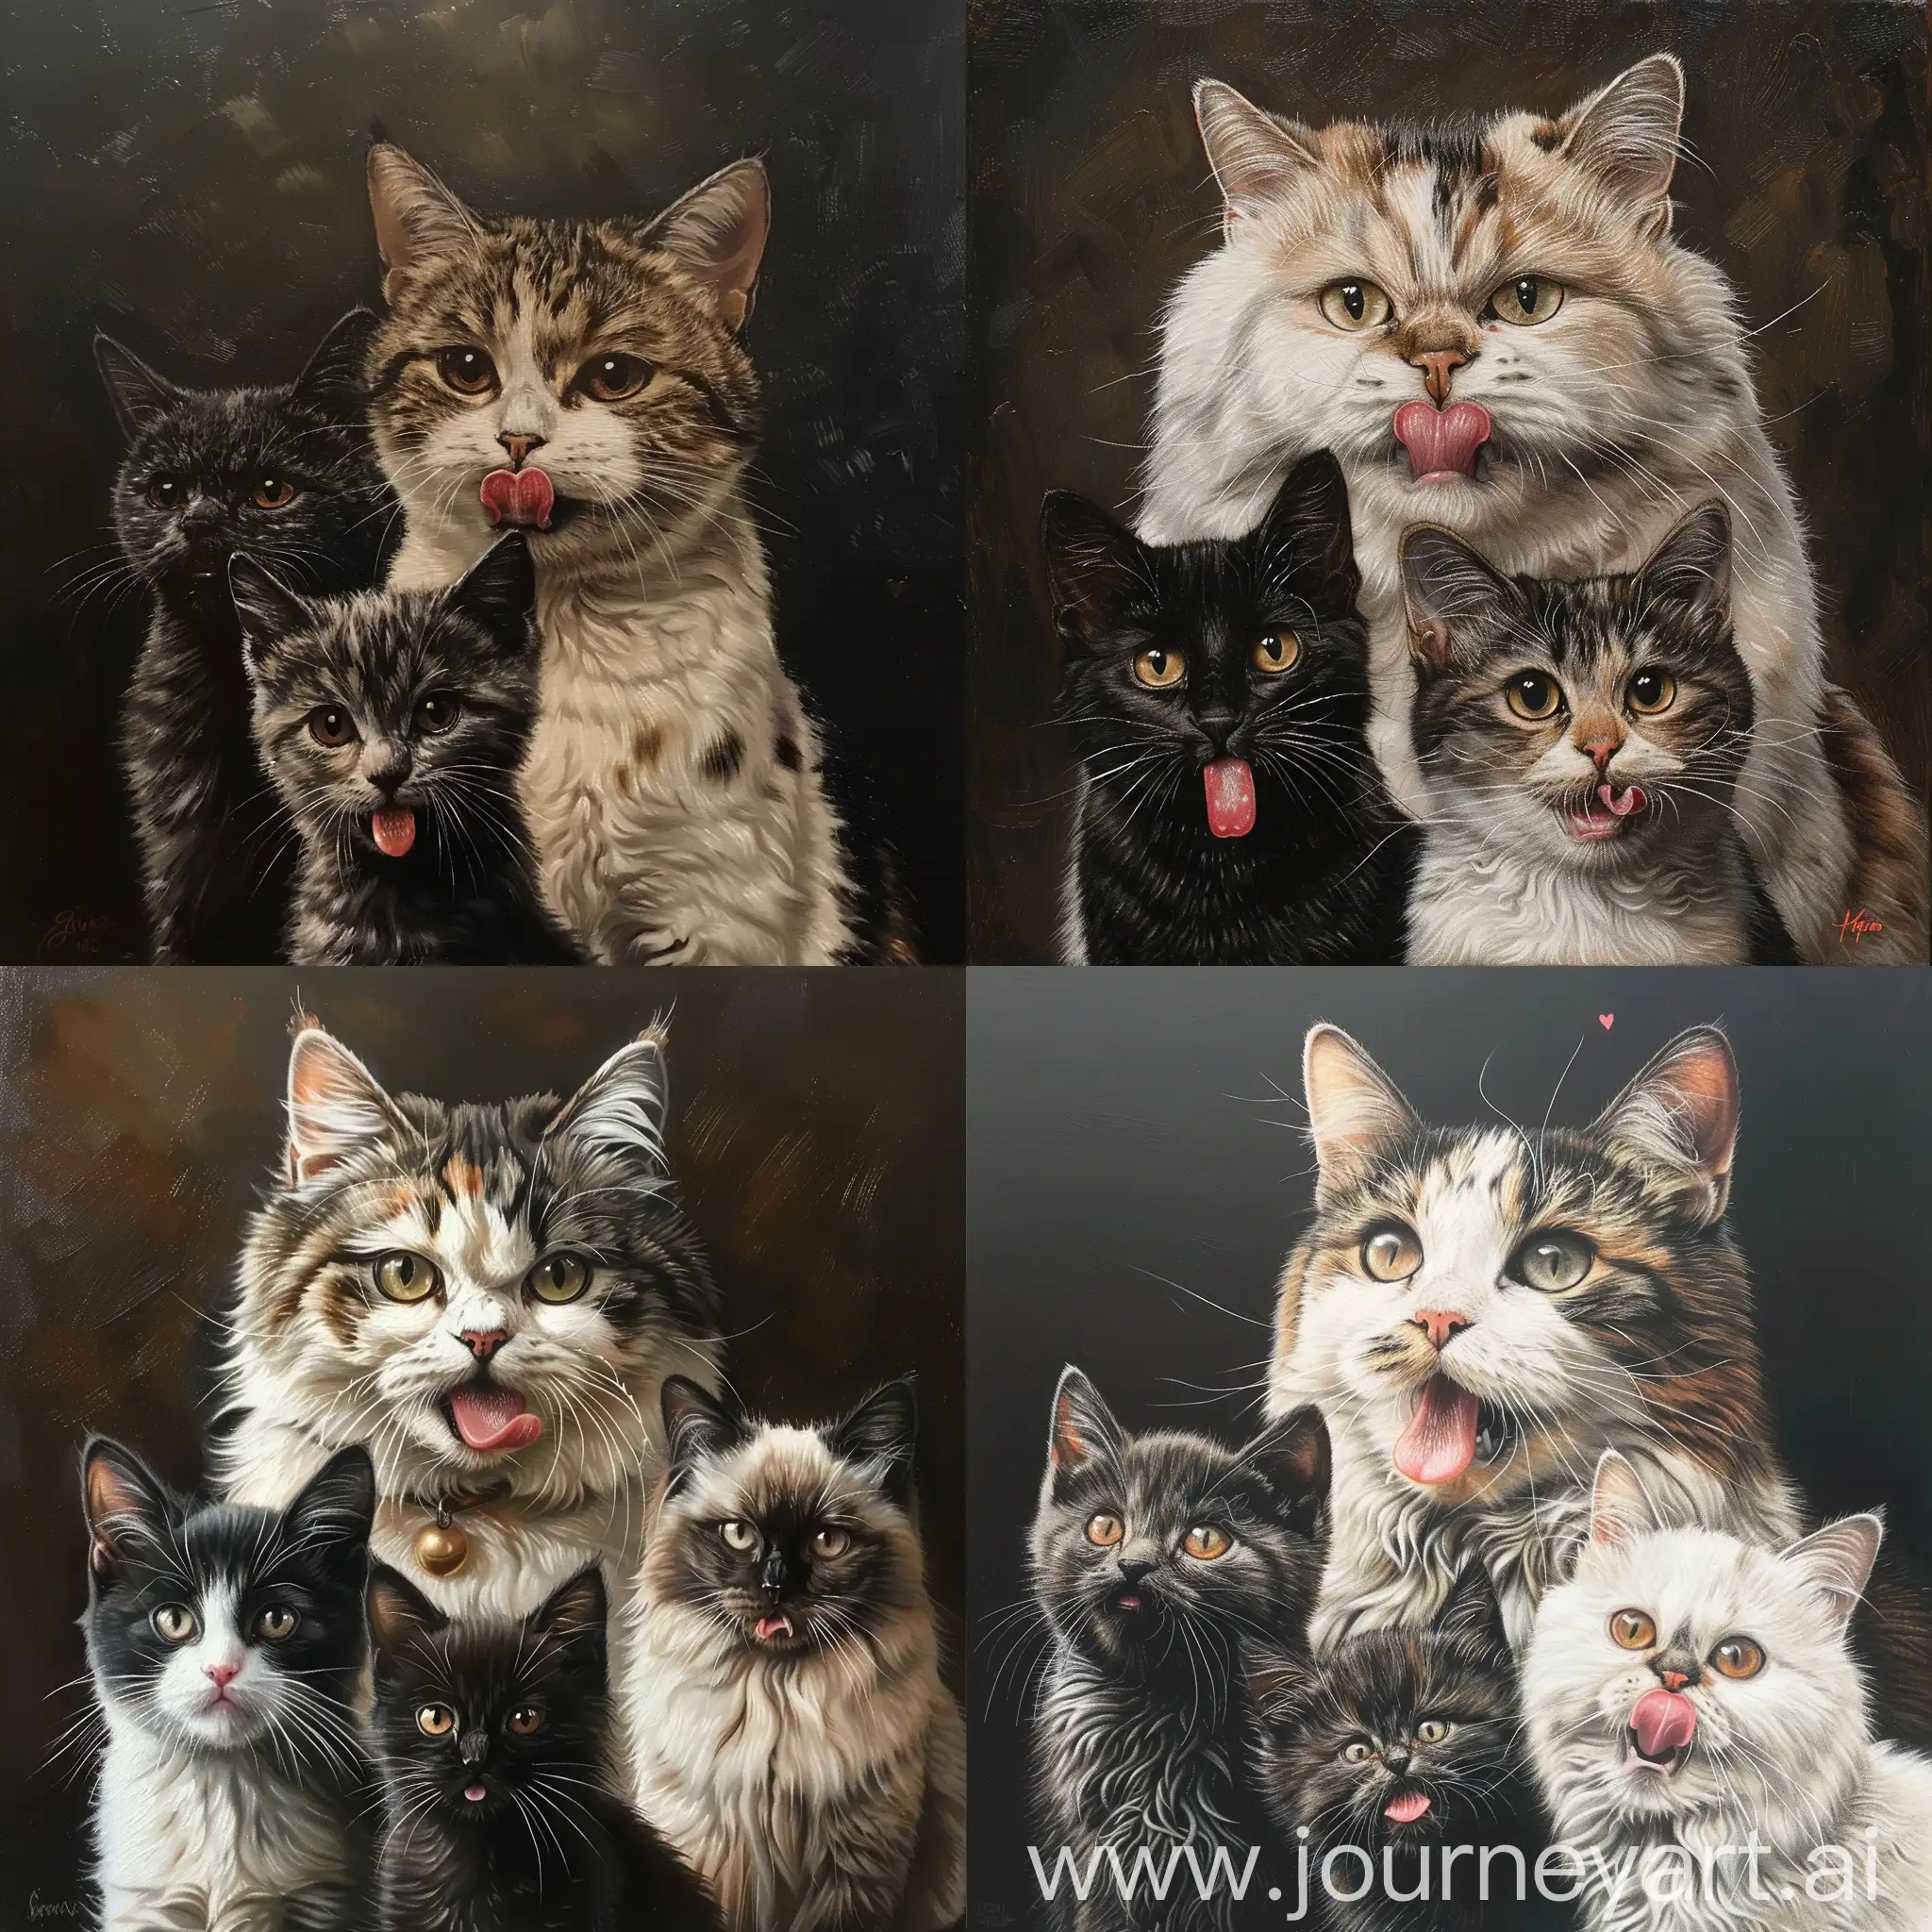 Three-Playful-Cats-White-Black-and-Grey-Kittens